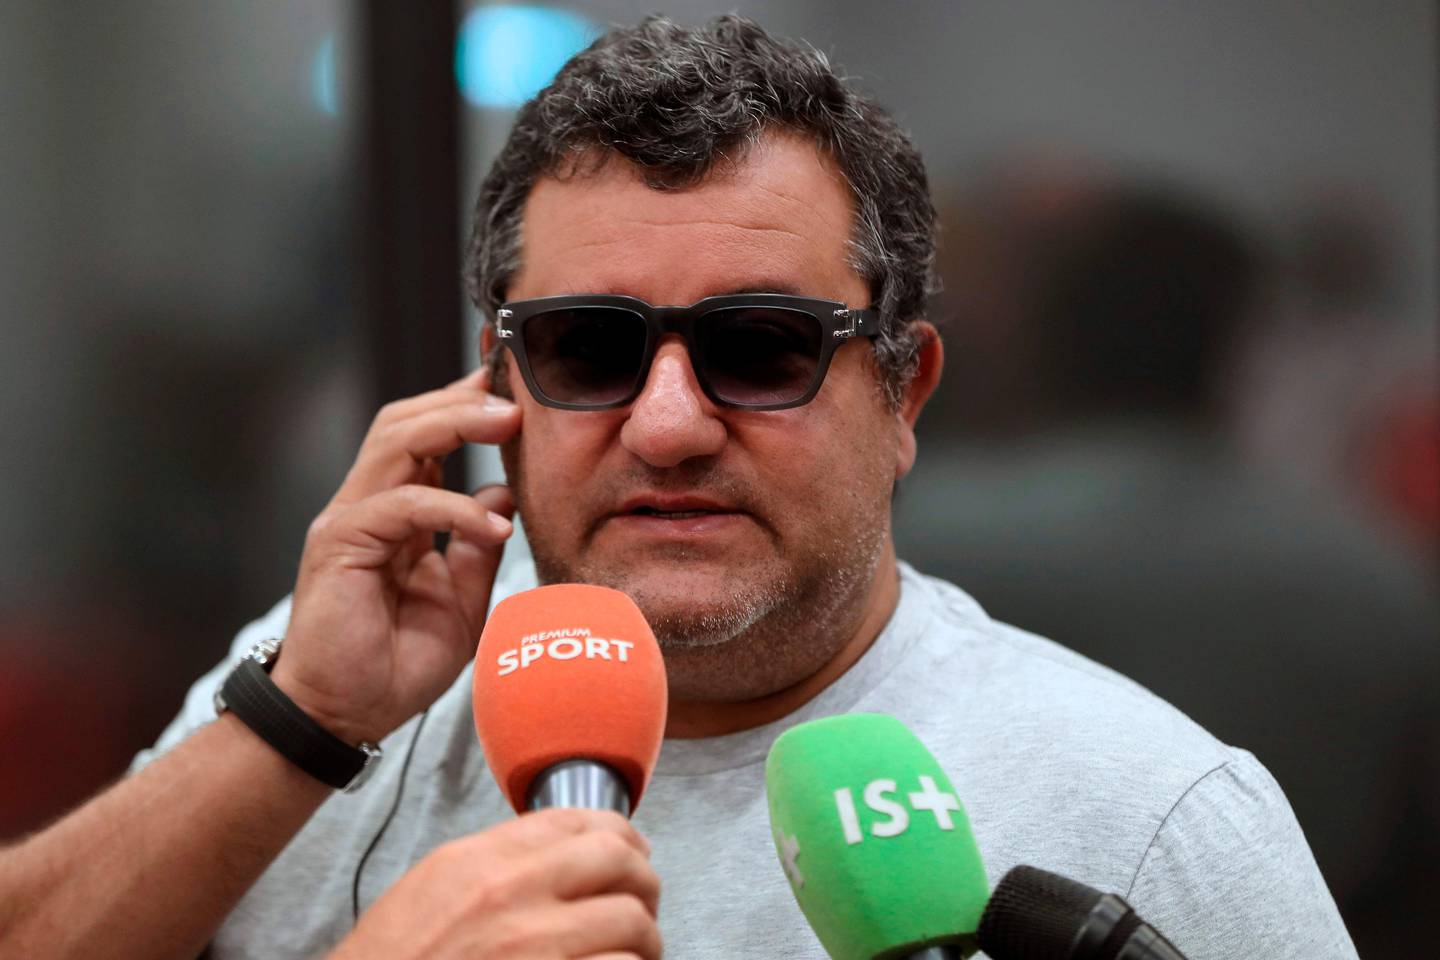 (FILES) In this file photo taken on September 2, 2016, Italian-born Dutch football agent Mino Raiola speaks to journalists during a presentation of Nice's football club new signings at the Allianz Riviera stadium in Nice, southeastern France.
Manchester City were offered the chance to sign Manchester United's Paul Pogba during the January transfer window, according to City manager Pep Guardiola. "I said no. We don't have the money to buy Pogba because he is so expensive," Guardiola told reporters on Friday as he attacked the conduct of agent Mino Raiola.
 / AFP PHOTO / VALERY HACHE